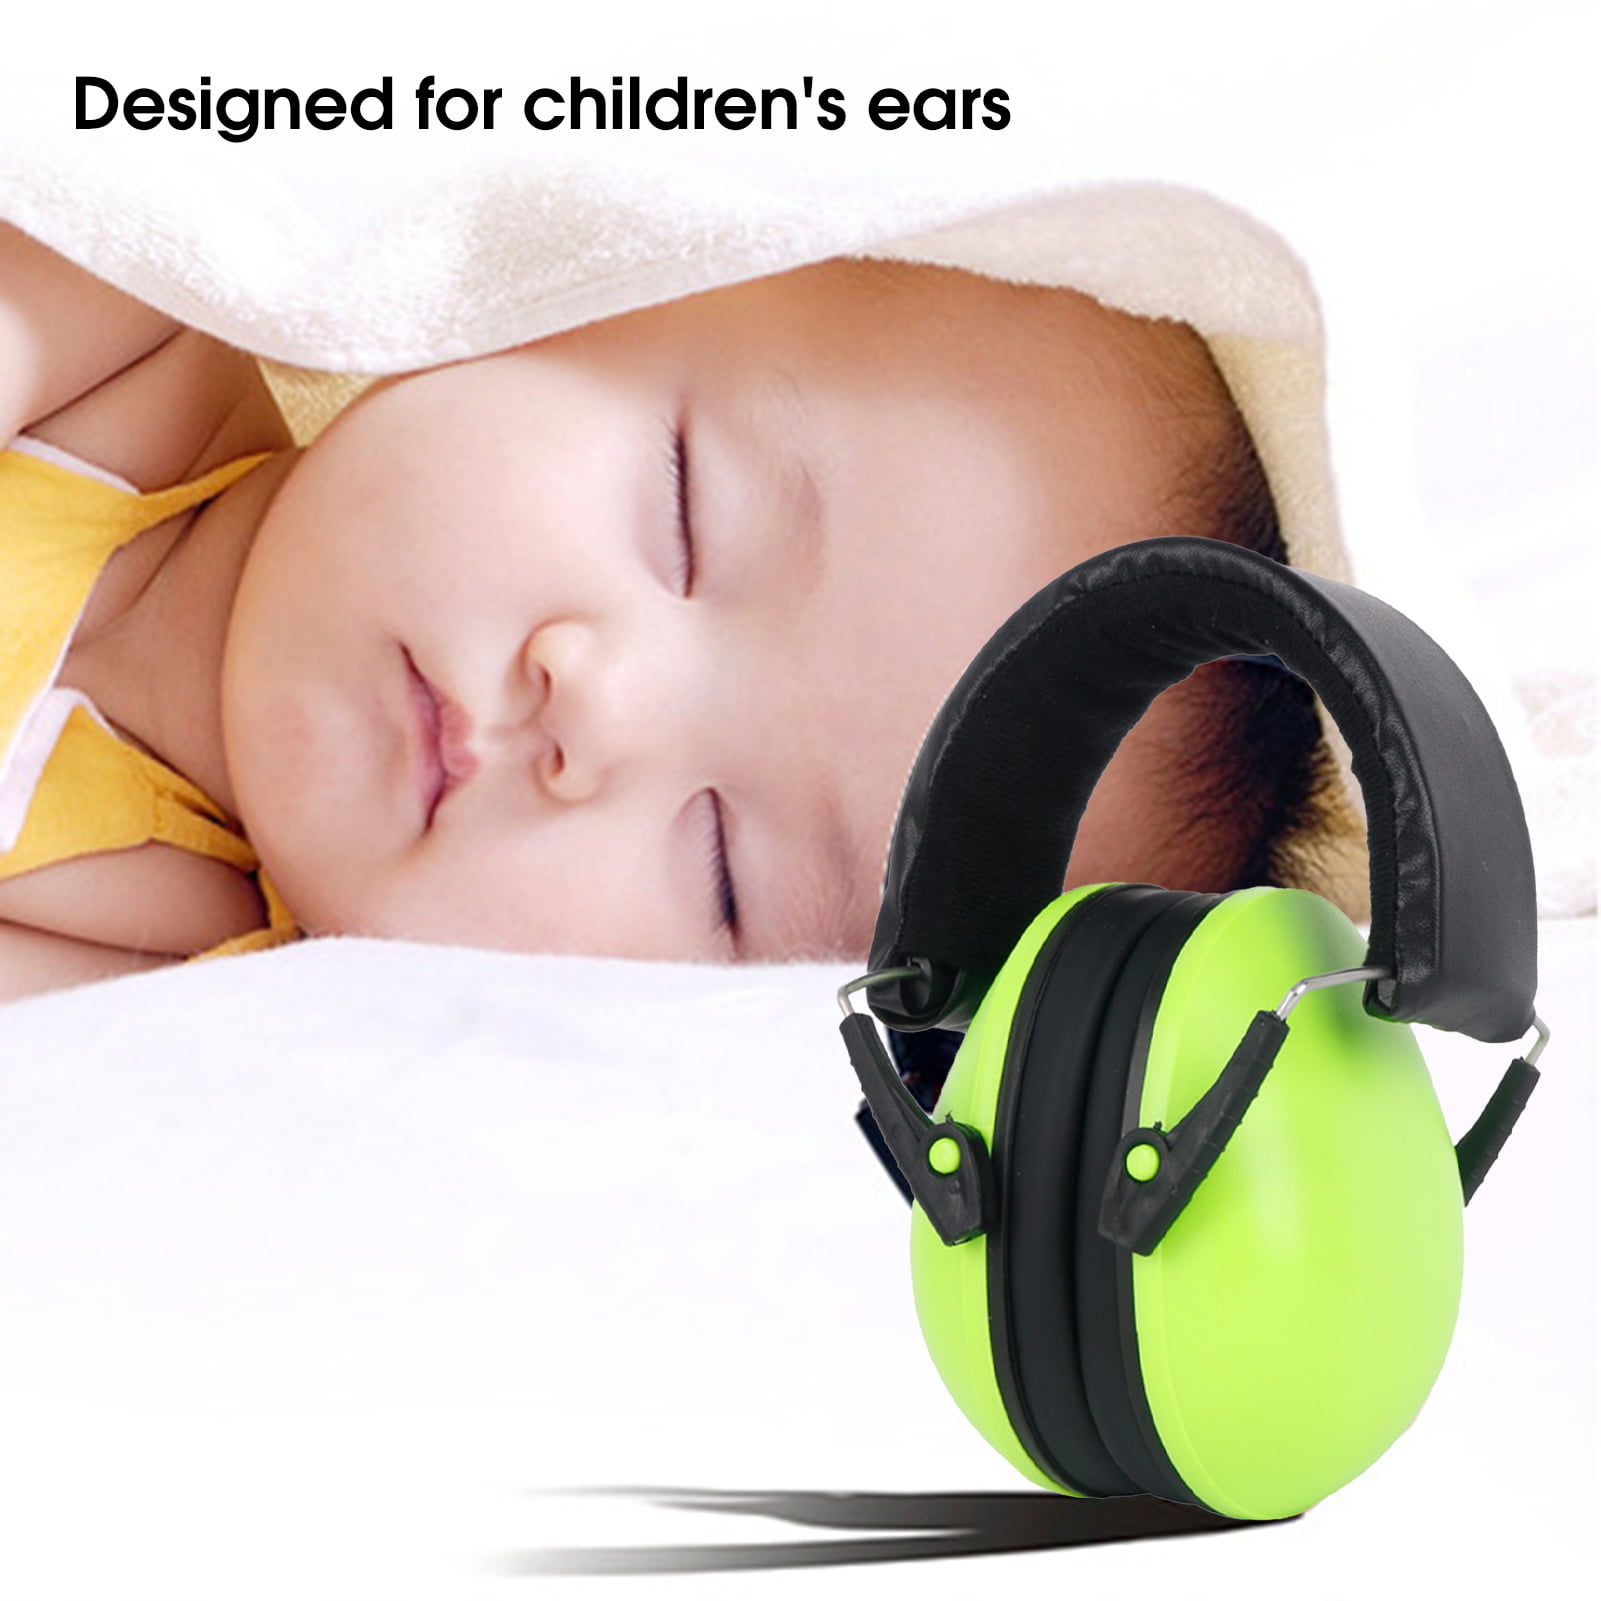 Baby Infant Earmuffs Ear muffs Sleeping Hearing Protection Noise Reducing 